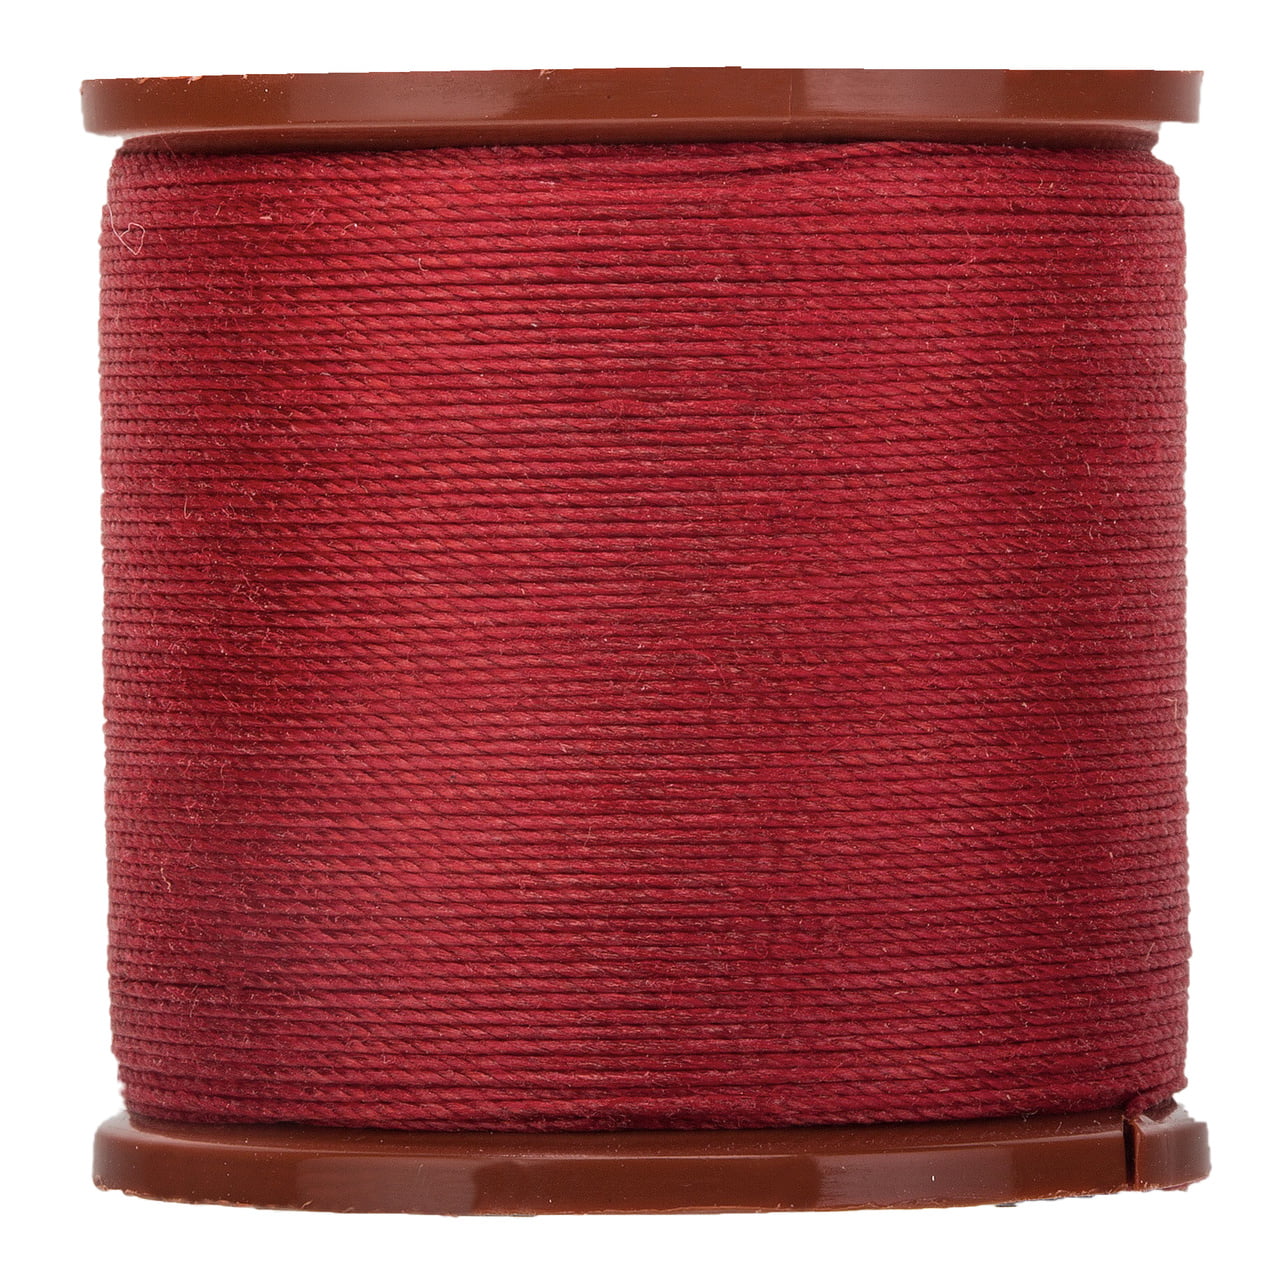 coats-clark-button-craft-color-polyester-cotton-sewing-thread-50-yards-walmart